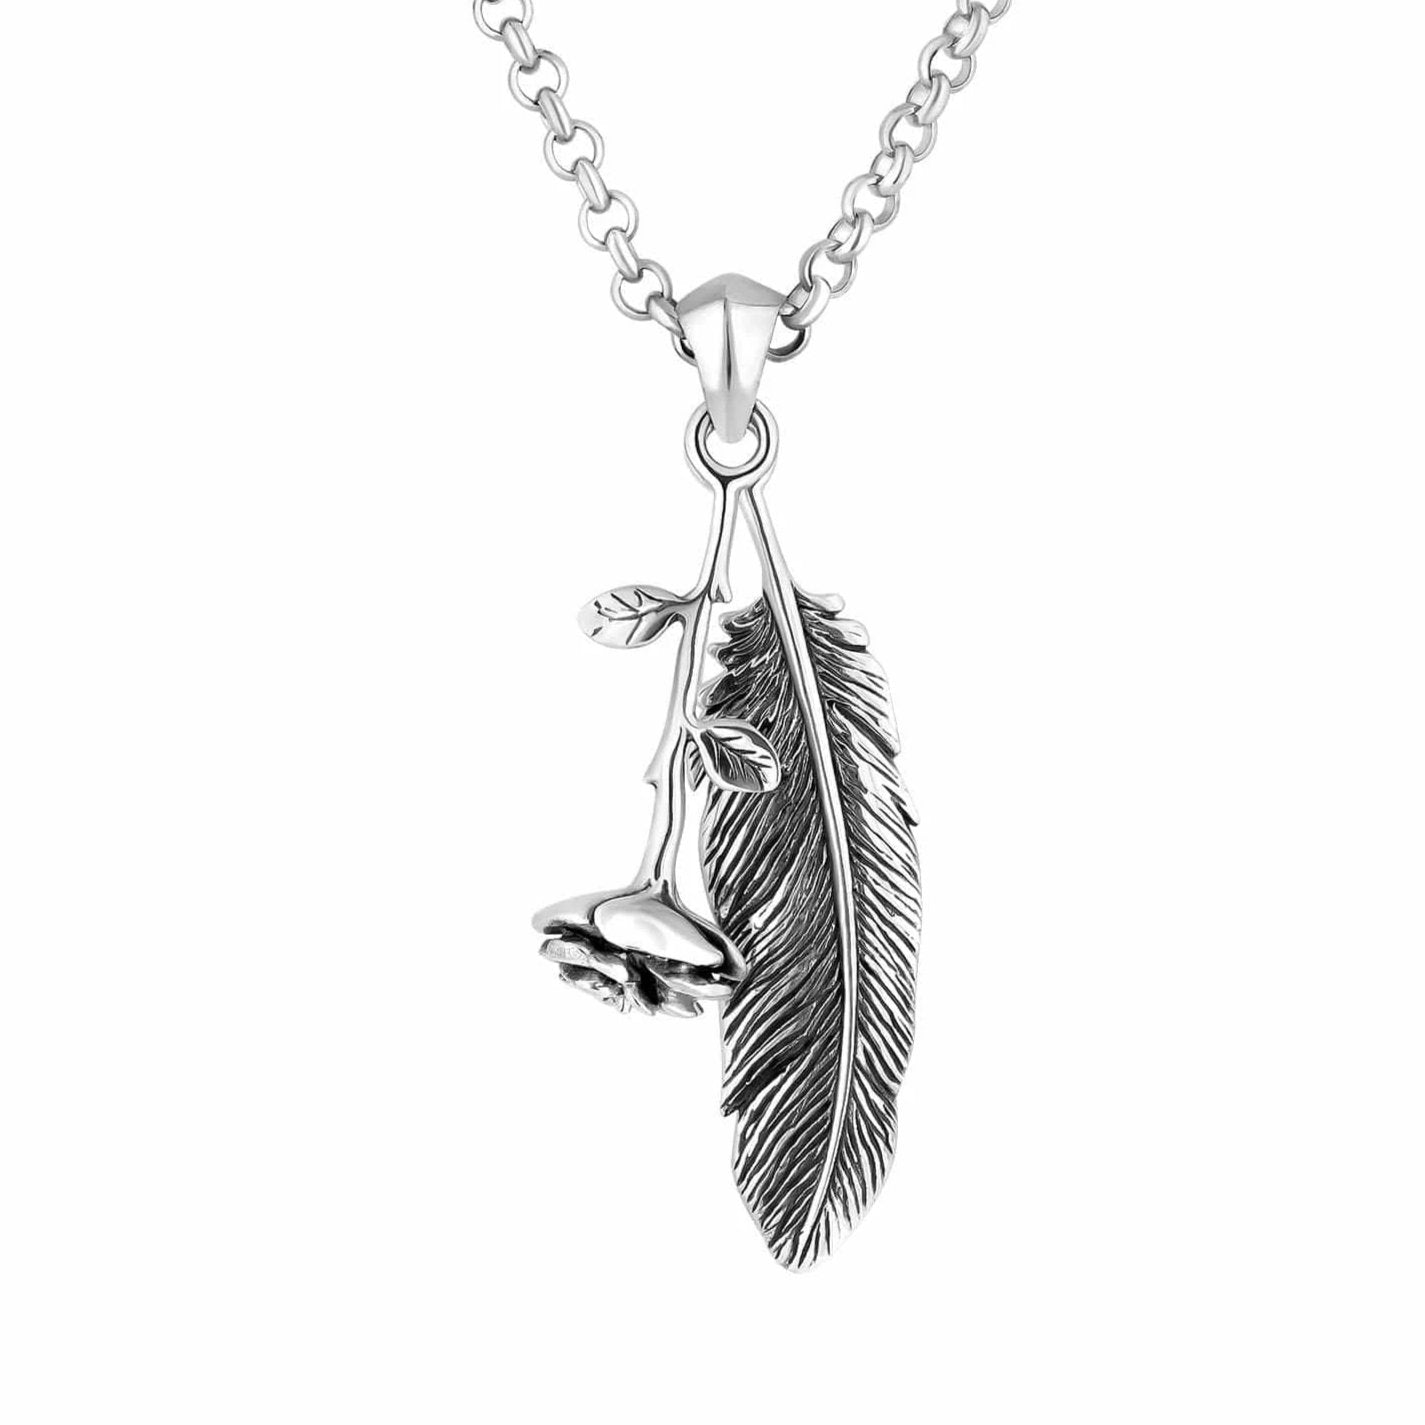 Rose and Feather Necklace - Silver Phantom Jewelry